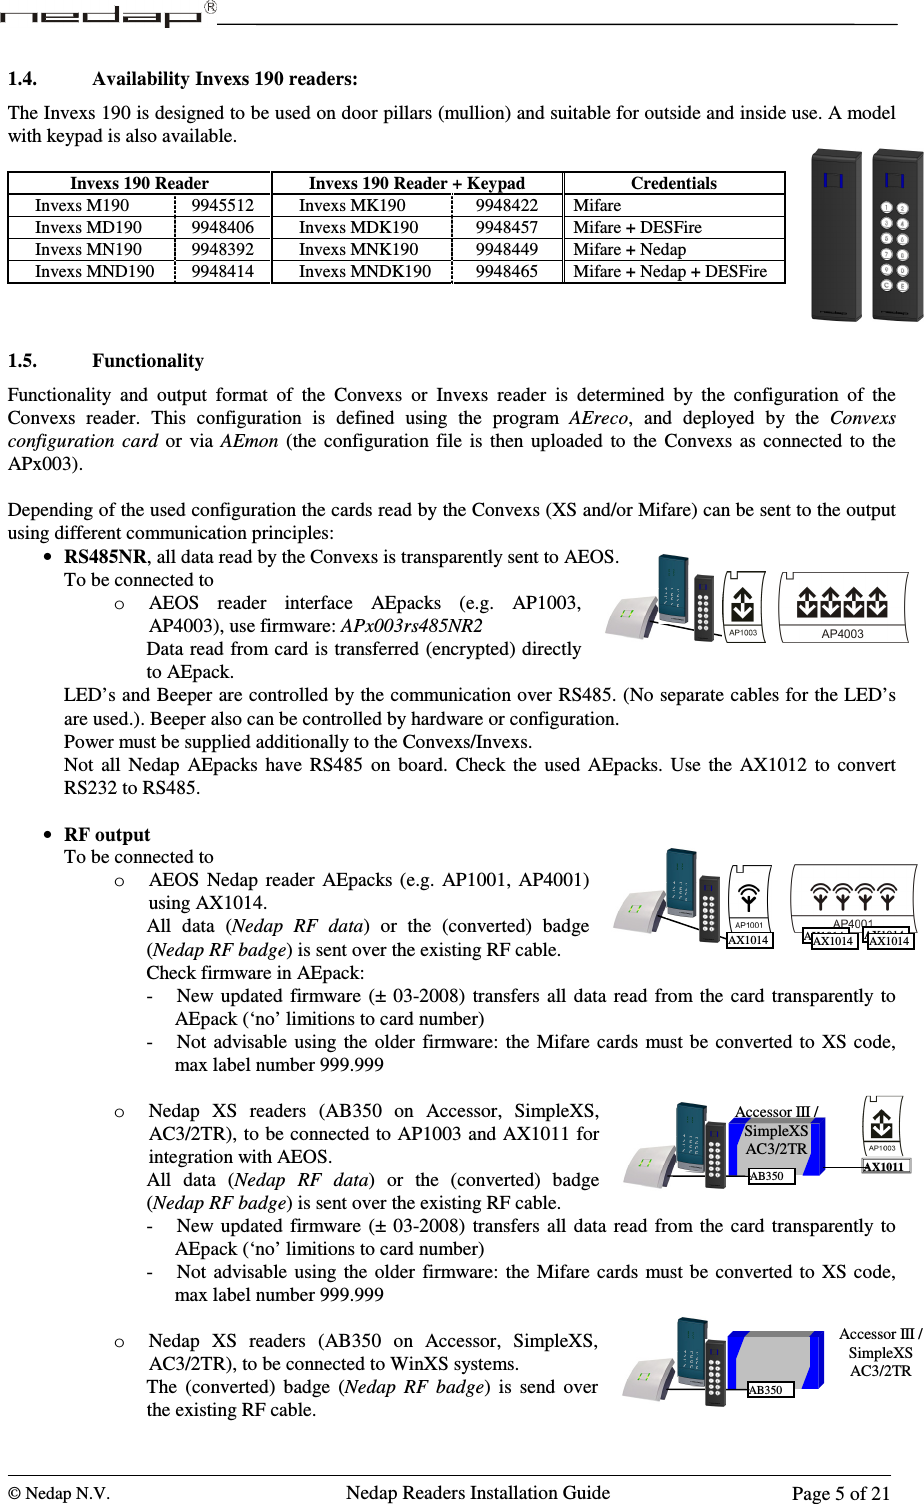  © Nedap N.V.                   Nedap Readers Installation Guide      Page 5 of 21 Accessor III / SimpleXS AC3/2TR AB350 AX1011 1.4. Availability Invexs 190 readers: The Invexs 190 is designed to be used on door pillars (mullion) and suitable for outside and inside use. A model with keypad is also available.  Invexs 190 Reader Invexs 190 Reader + Keypad Credentials   Invexs M190  9945512    Invexs MK190  9948422  Mifare   Invexs MD190  9948406    Invexs MDK190  9948457  Mifare + DESFire   Invexs MN190  9948392    Invexs MNK190  9948449  Mifare + Nedap   Invexs MND190  9948414    Invexs MNDK190  9948465  Mifare + Nedap + DESFire    1.5. Functionality Functionality  and  output  format  of  the  Convexs  or  Invexs  reader  is  determined  by  the  configuration  of  the Convexs  reader.  This  configuration  is  defined  using  the  program  AEreco,  and  deployed  by  the  Convexs configuration  card  or  via  AEmon  (the  configuration  file  is  then  uploaded  to  the  Convexs  as  connected  to  the APx003).   Depending of the used configuration the cards read by the Convexs (XS and/or Mifare) can be sent to the output using different communication principles: • RS485NR, all data read by the Convexs is transparently sent to AEOS. To be connected to o AEOS  reader  interface  AEpacks  (e.g.  AP1003, AP4003), use firmware: APx003rs485NR2 Data read from card is transferred (encrypted) directly to AEpack. LED’s and Beeper are controlled by the communication over RS485. (No separate cables for the LED’s are used.). Beeper also can be controlled by hardware or configuration. Power must be supplied additionally to the Convexs/Invexs. Not  all  Nedap  AEpacks  have  RS485  on  board.  Check  the  used  AEpacks.  Use  the  AX1012  to  convert RS232 to RS485.  • RF output To be connected to o AEOS  Nedap  reader  AEpacks  (e.g.  AP1001,  AP4001) using AX1014. All  data  (Nedap RF  data)  or  the  (converted)  badge (Nedap RF badge) is sent over the existing RF cable. Check firmware in AEpack:  - New updated  firmware  (±  03-2008)  transfers all data  read  from  the card transparently to AEpack (‘no’ limitions to card number) - Not  advisable  using the  older  firmware: the Mifare cards must  be  converted to XS code, max label number 999.999  o Nedap  XS  readers  (AB350  on  Accessor,  SimpleXS, AC3/2TR), to be connected to AP1003 and AX1011 for integration with AEOS. All  data  (Nedap RF  data)  or  the  (converted)  badge (Nedap RF badge) is sent over the existing RF cable. - New updated  firmware  (±  03-2008)  transfers all data  read  from  the card transparently to AEpack (‘no’ limitions to card number) - Not  advisable  using the  older  firmware:  the Mifare cards  must  be  converted  to XS code, max label number 999.999  o Nedap  XS  readers  (AB350  on  Accessor,  SimpleXS, AC3/2TR), to be connected to WinXS systems. The  (converted)  badge  (Nedap RF  badge)  is  send  over the existing RF cable. AX1014 AX1014 AX1014 AX1014 AX1014 Accessor III / SimpleXS AC3/2TR AB350 123456789C0E123456789C0E123456789C0E123456789C0E